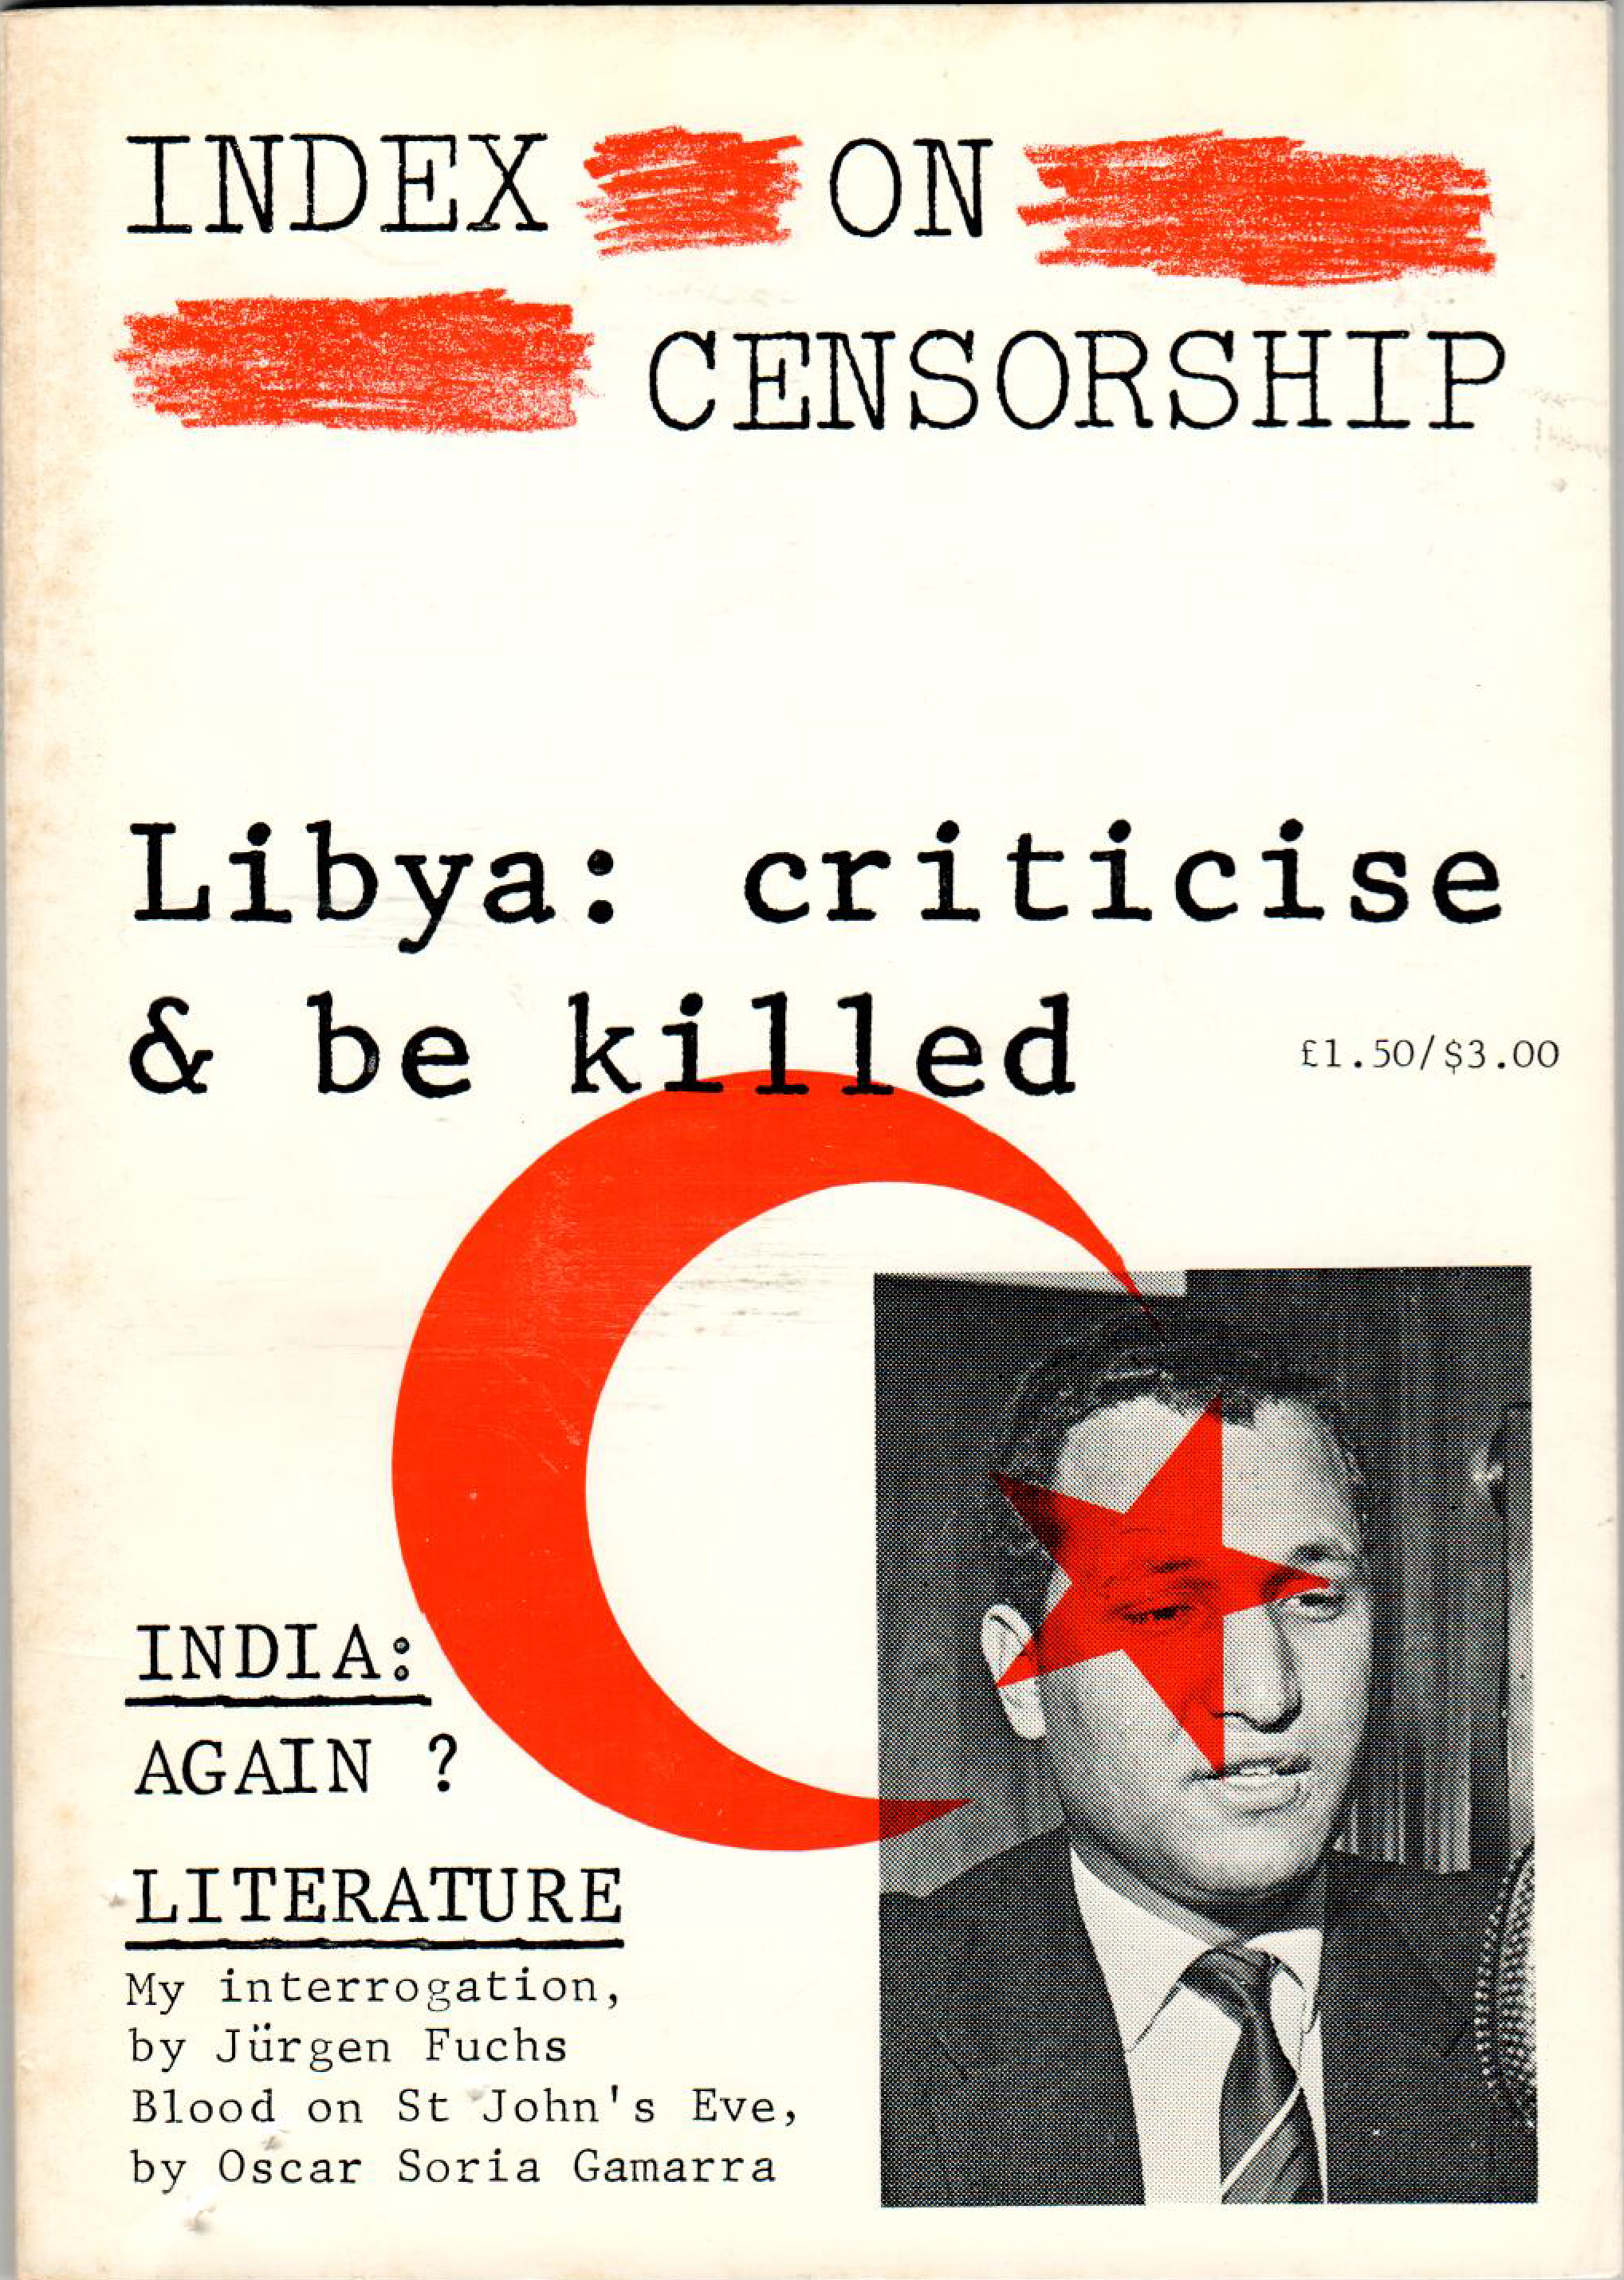 Libya: Criticise & be killed, the December 1980 issue of Index on Censorship magazine